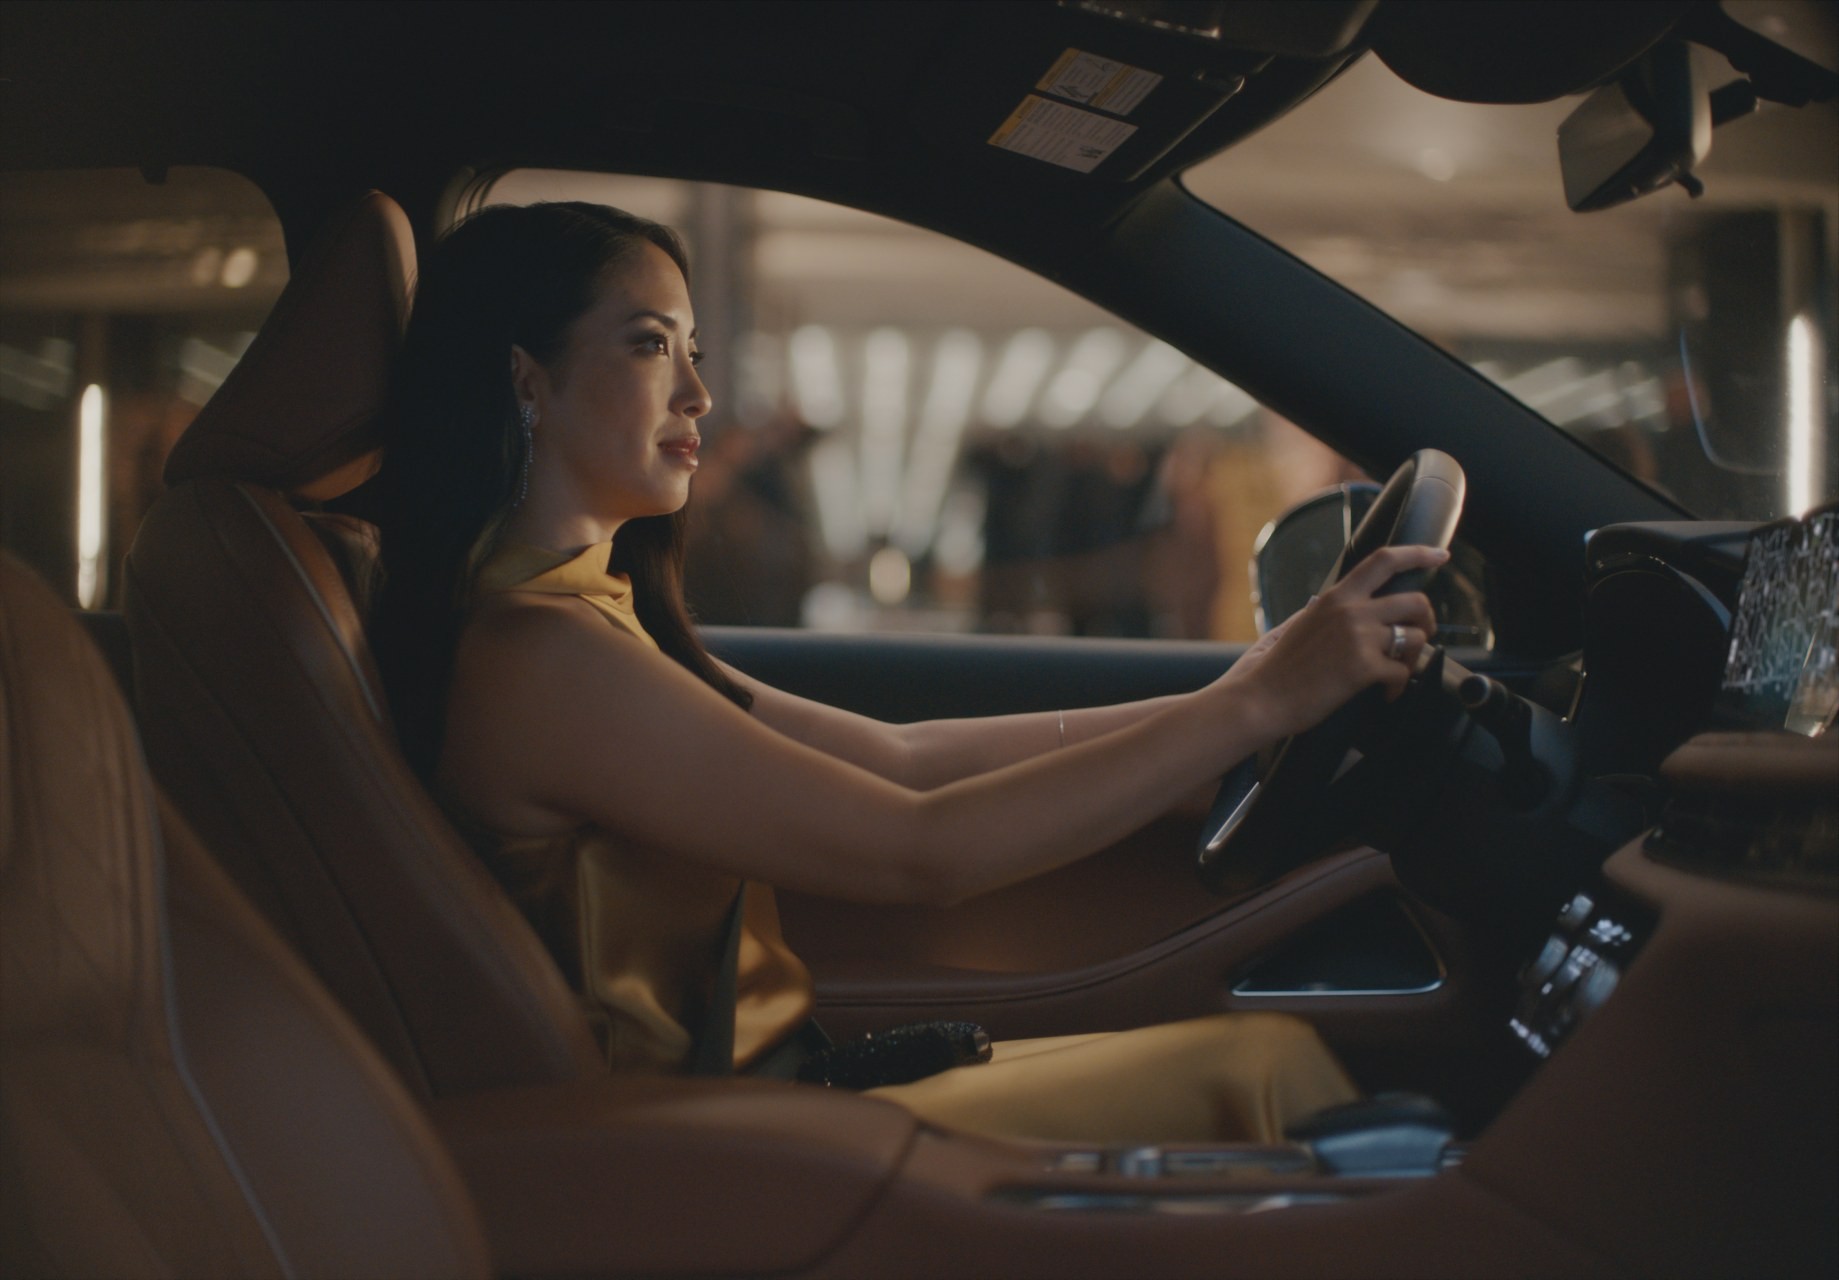 Infiniti's Latest Advertising Campaign Focuses on the Luxury of Being